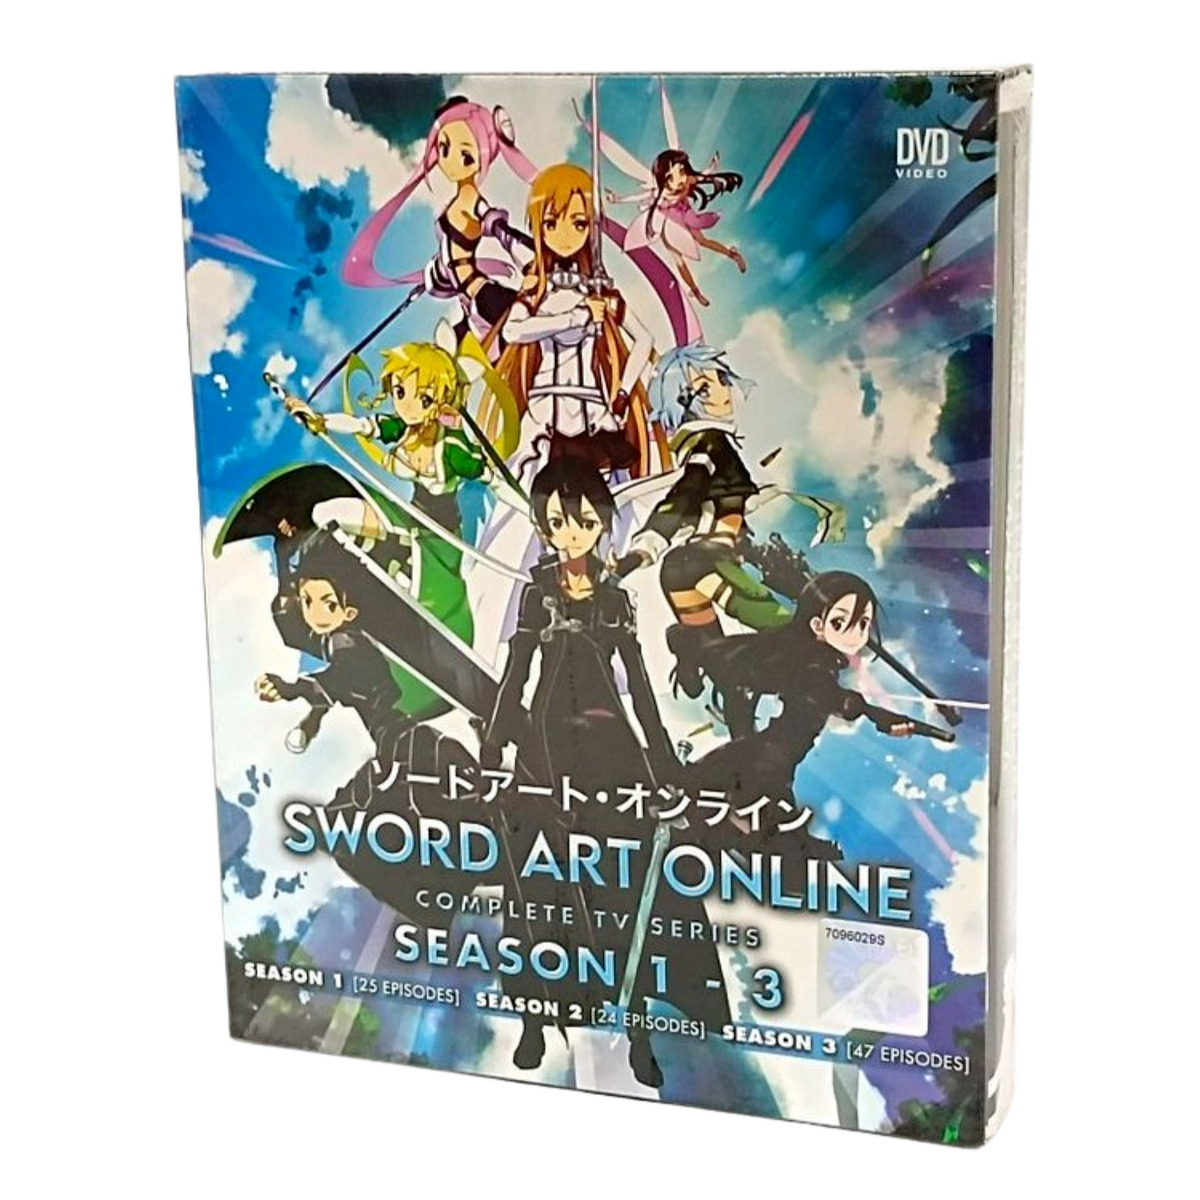 dedric thomas recommends sword art online dubbed english pic